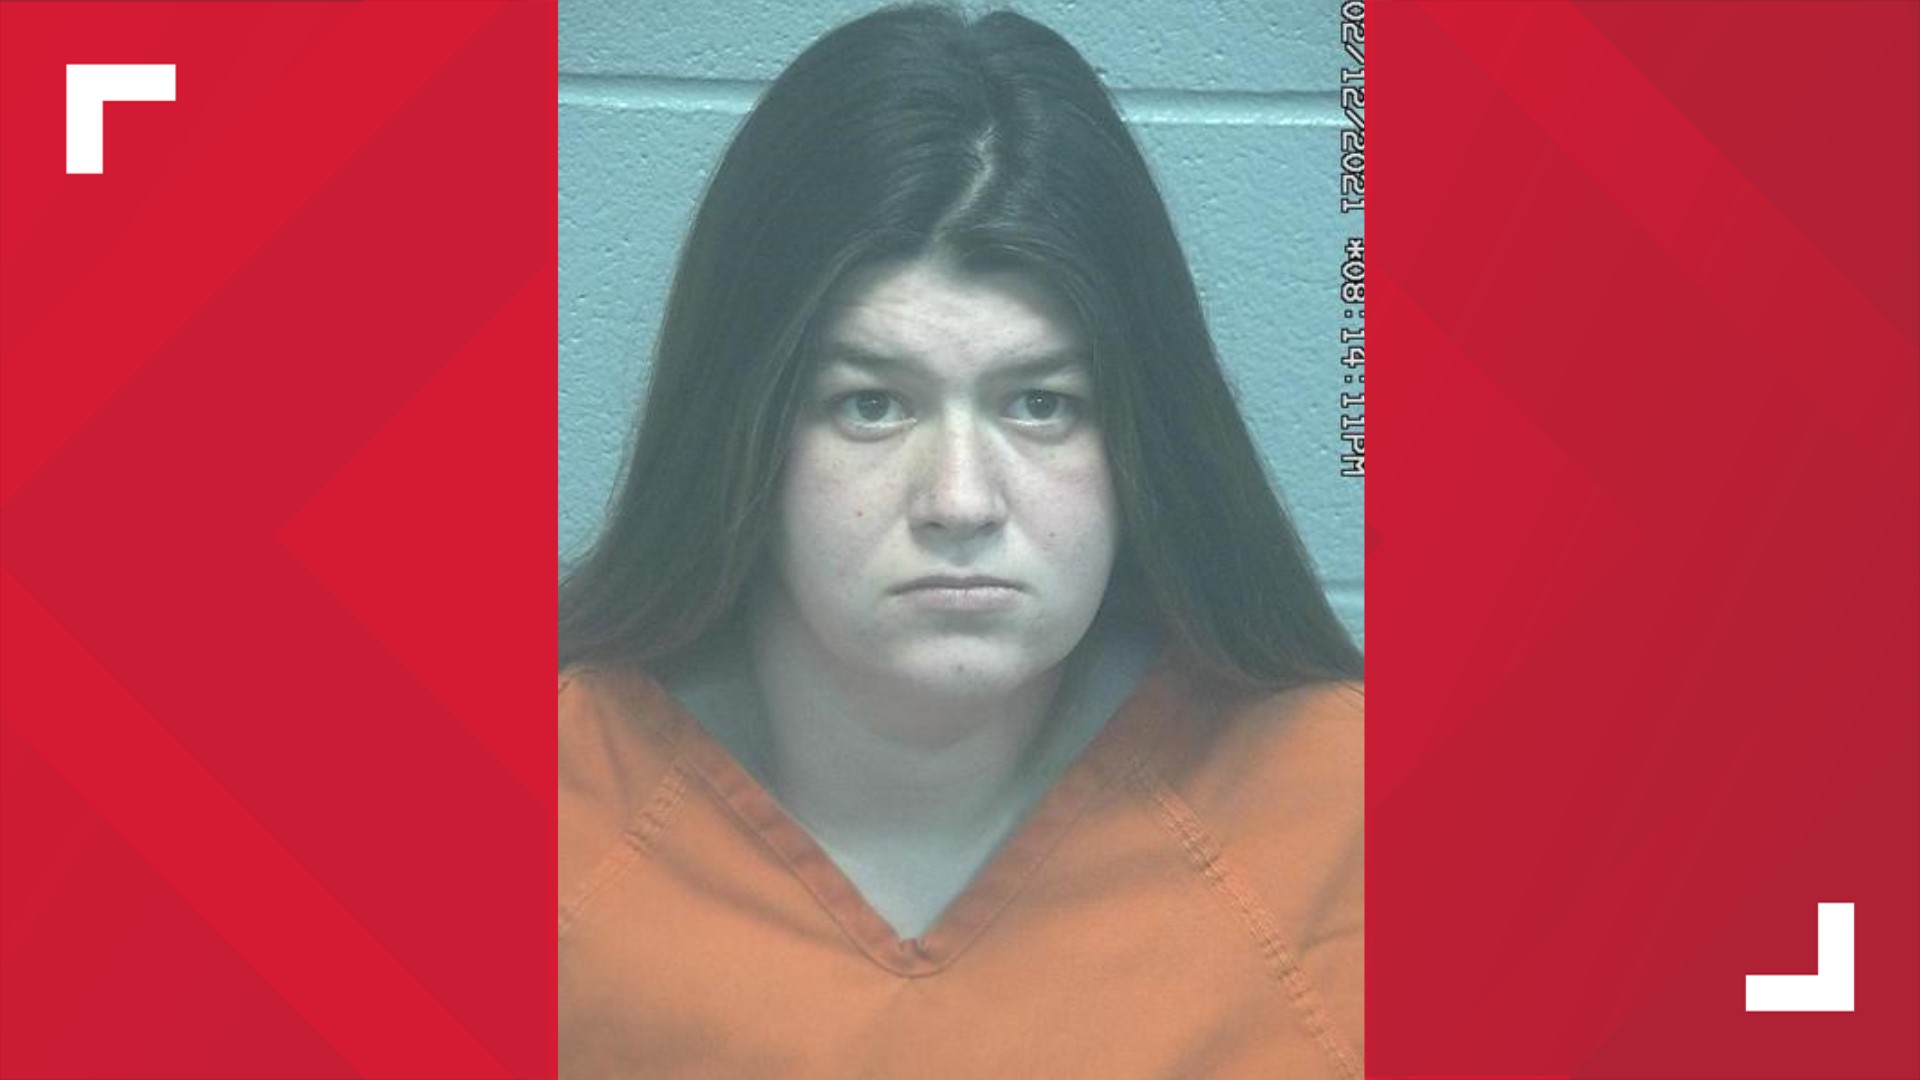 An arrest affidavit obtained by NewsWest 9 has revealed new details on the events leading up to the arrest of Megan Cawley.